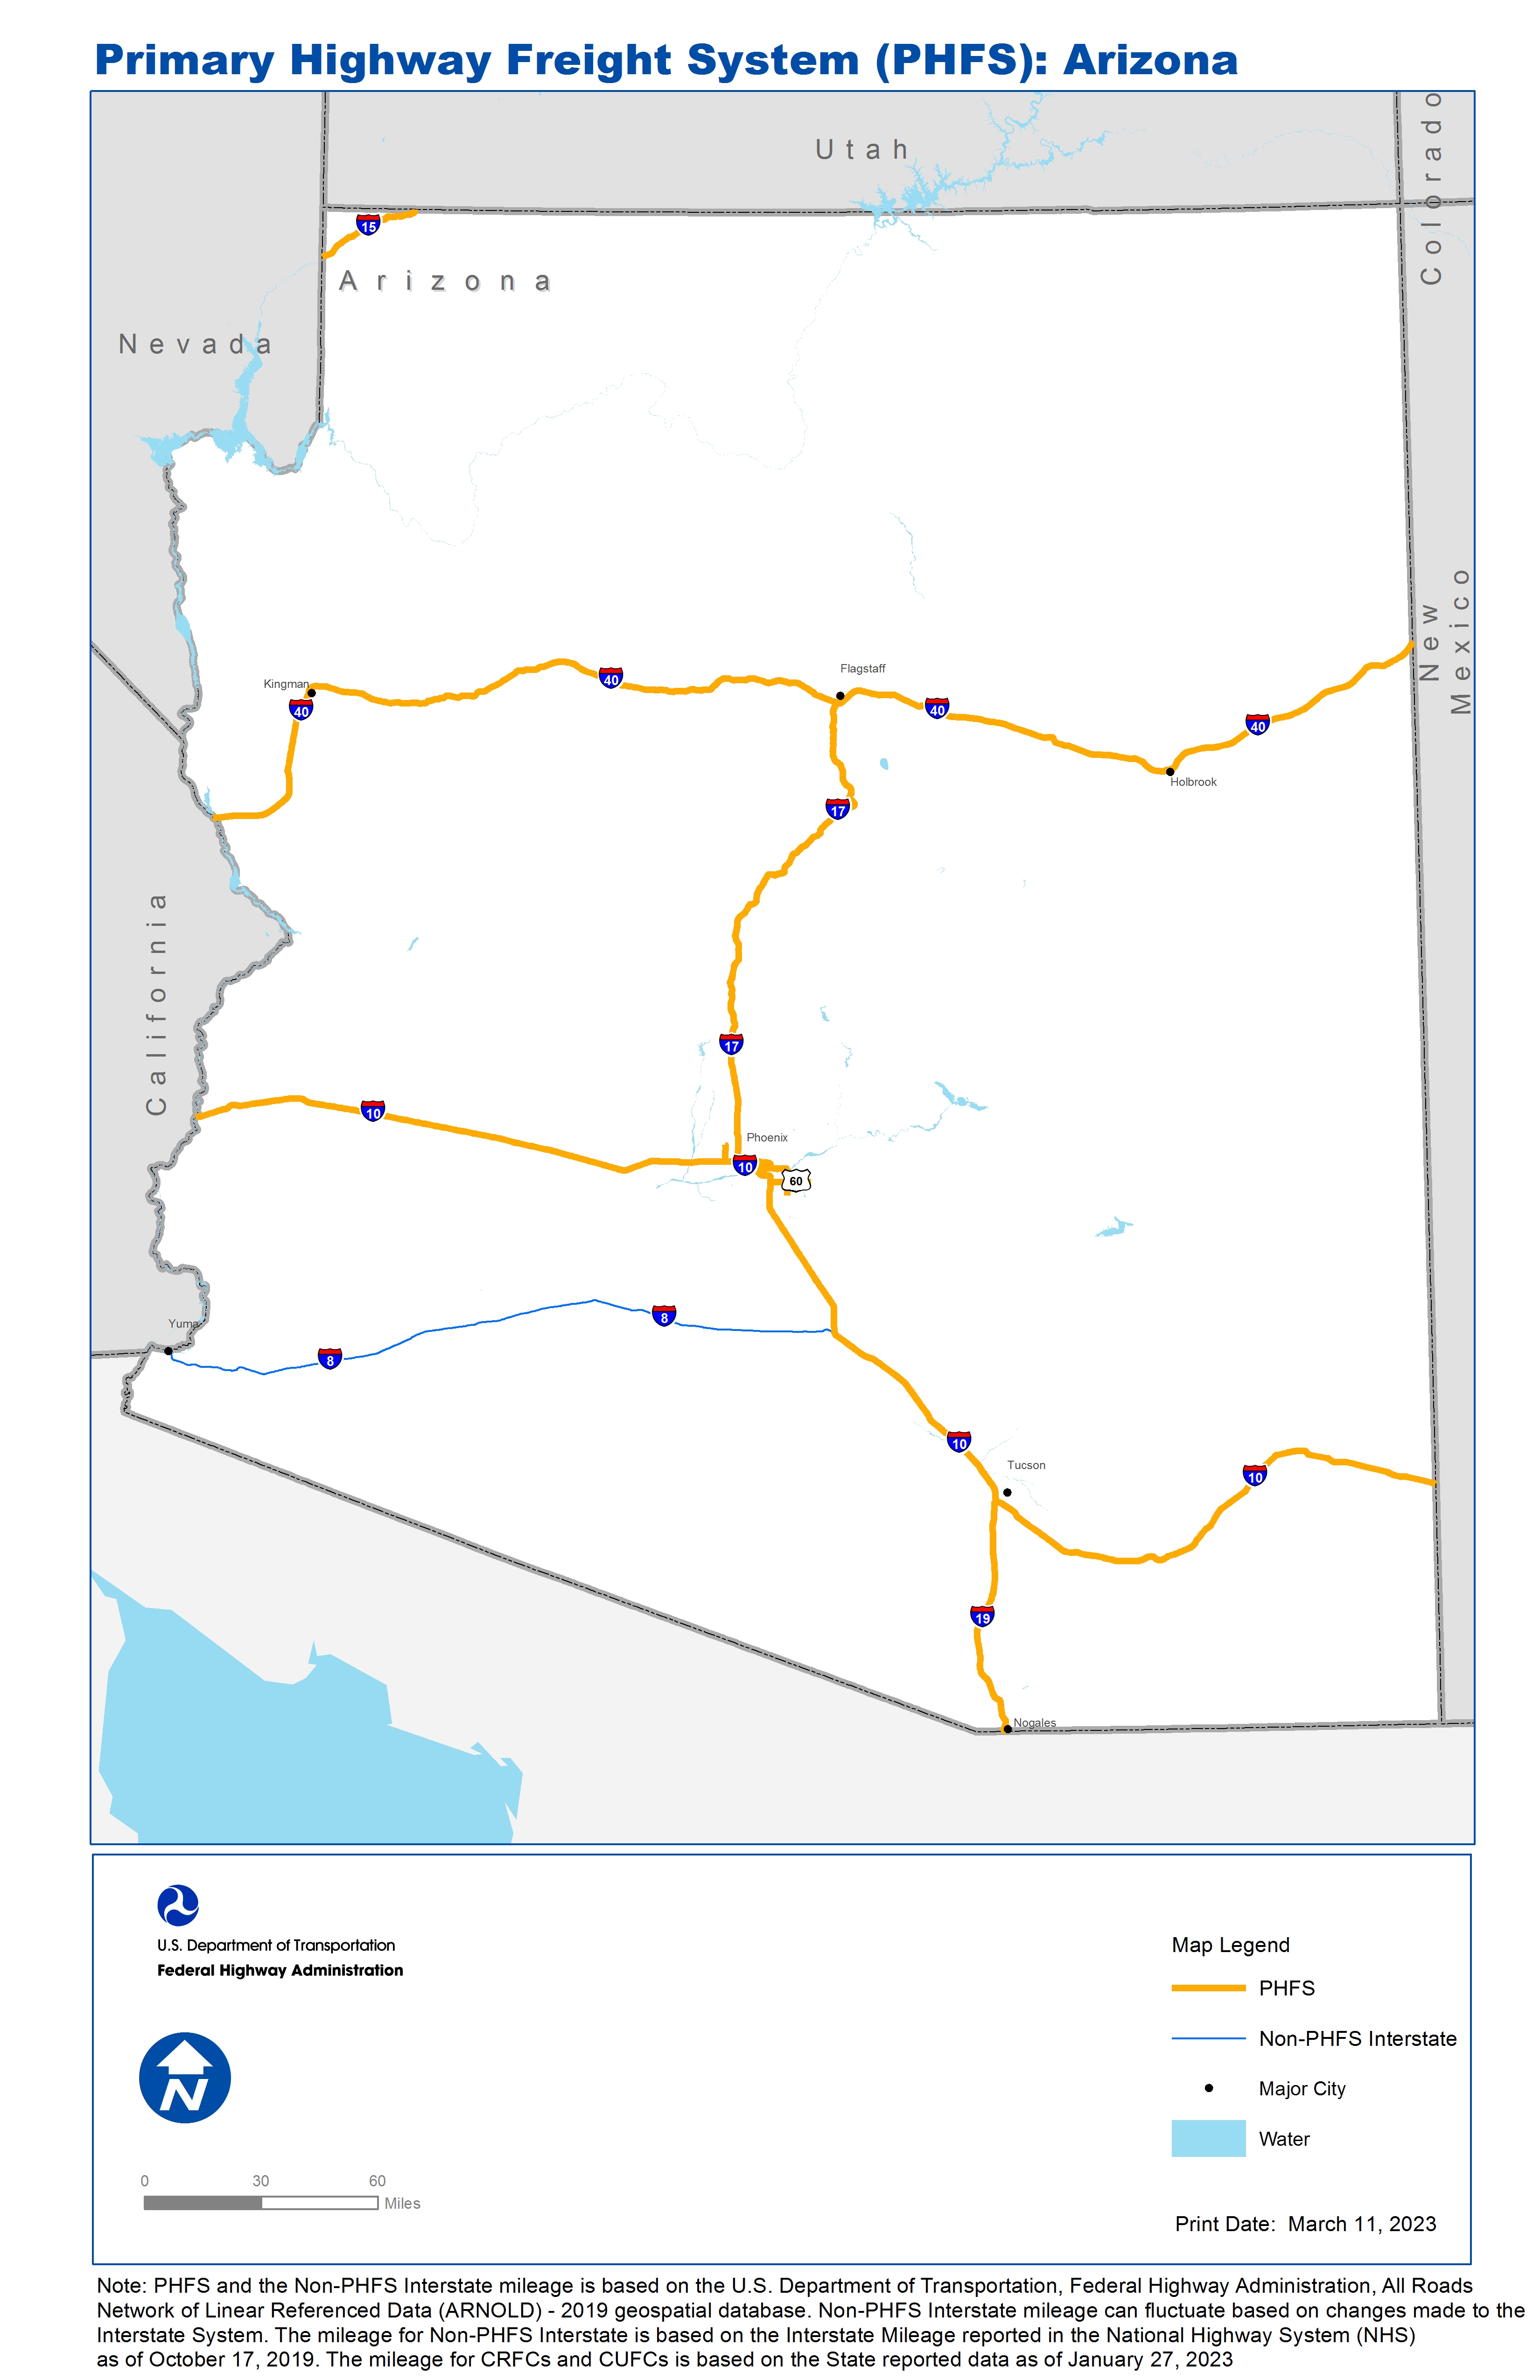 This map shows the Primary Highway Freight System (PHFS) routes as well as all the Interstate Highways within the state that are not part of the PHFS.